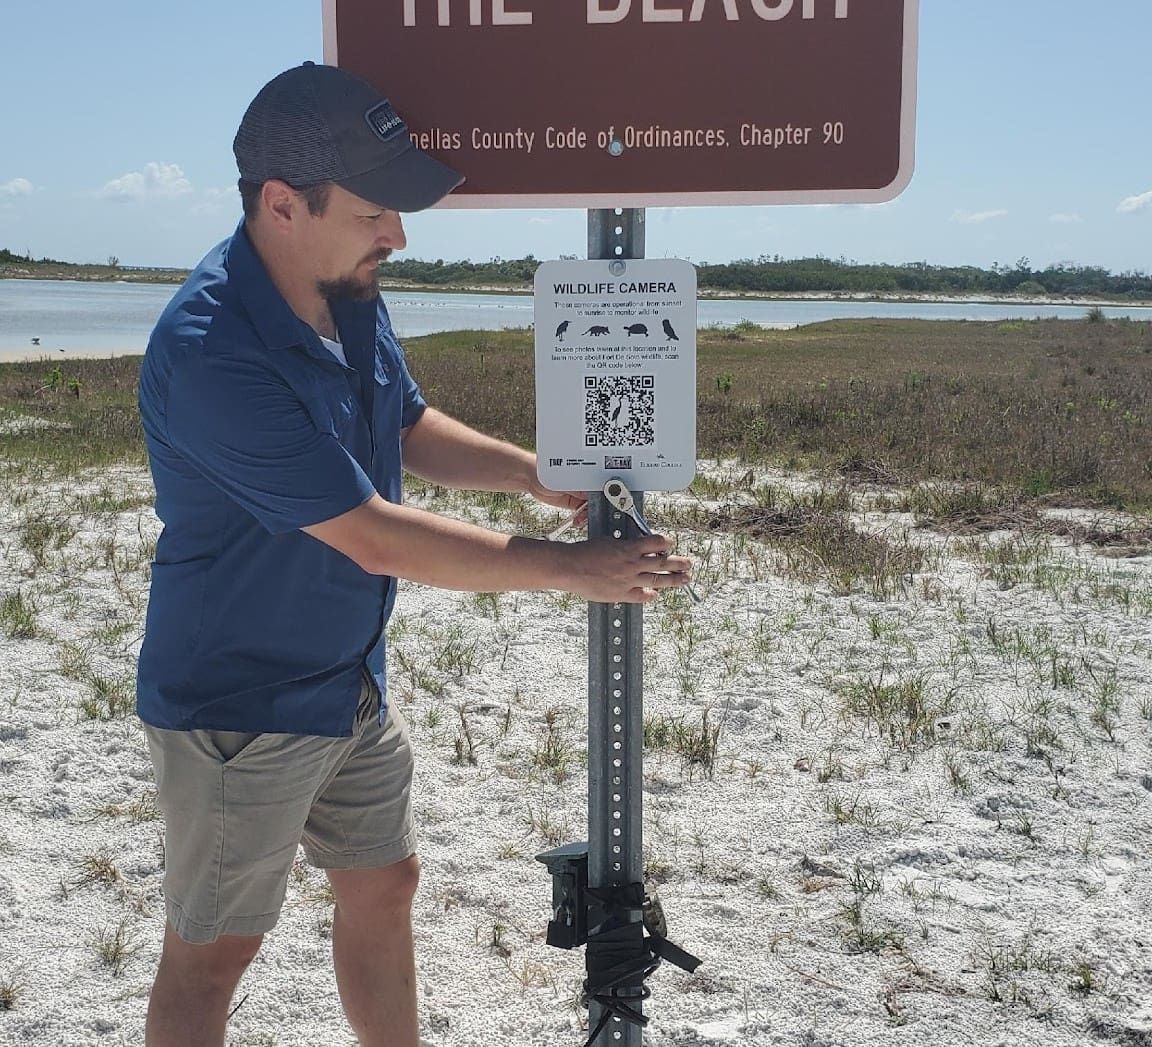 man using tools to install a sign on a post at the beach